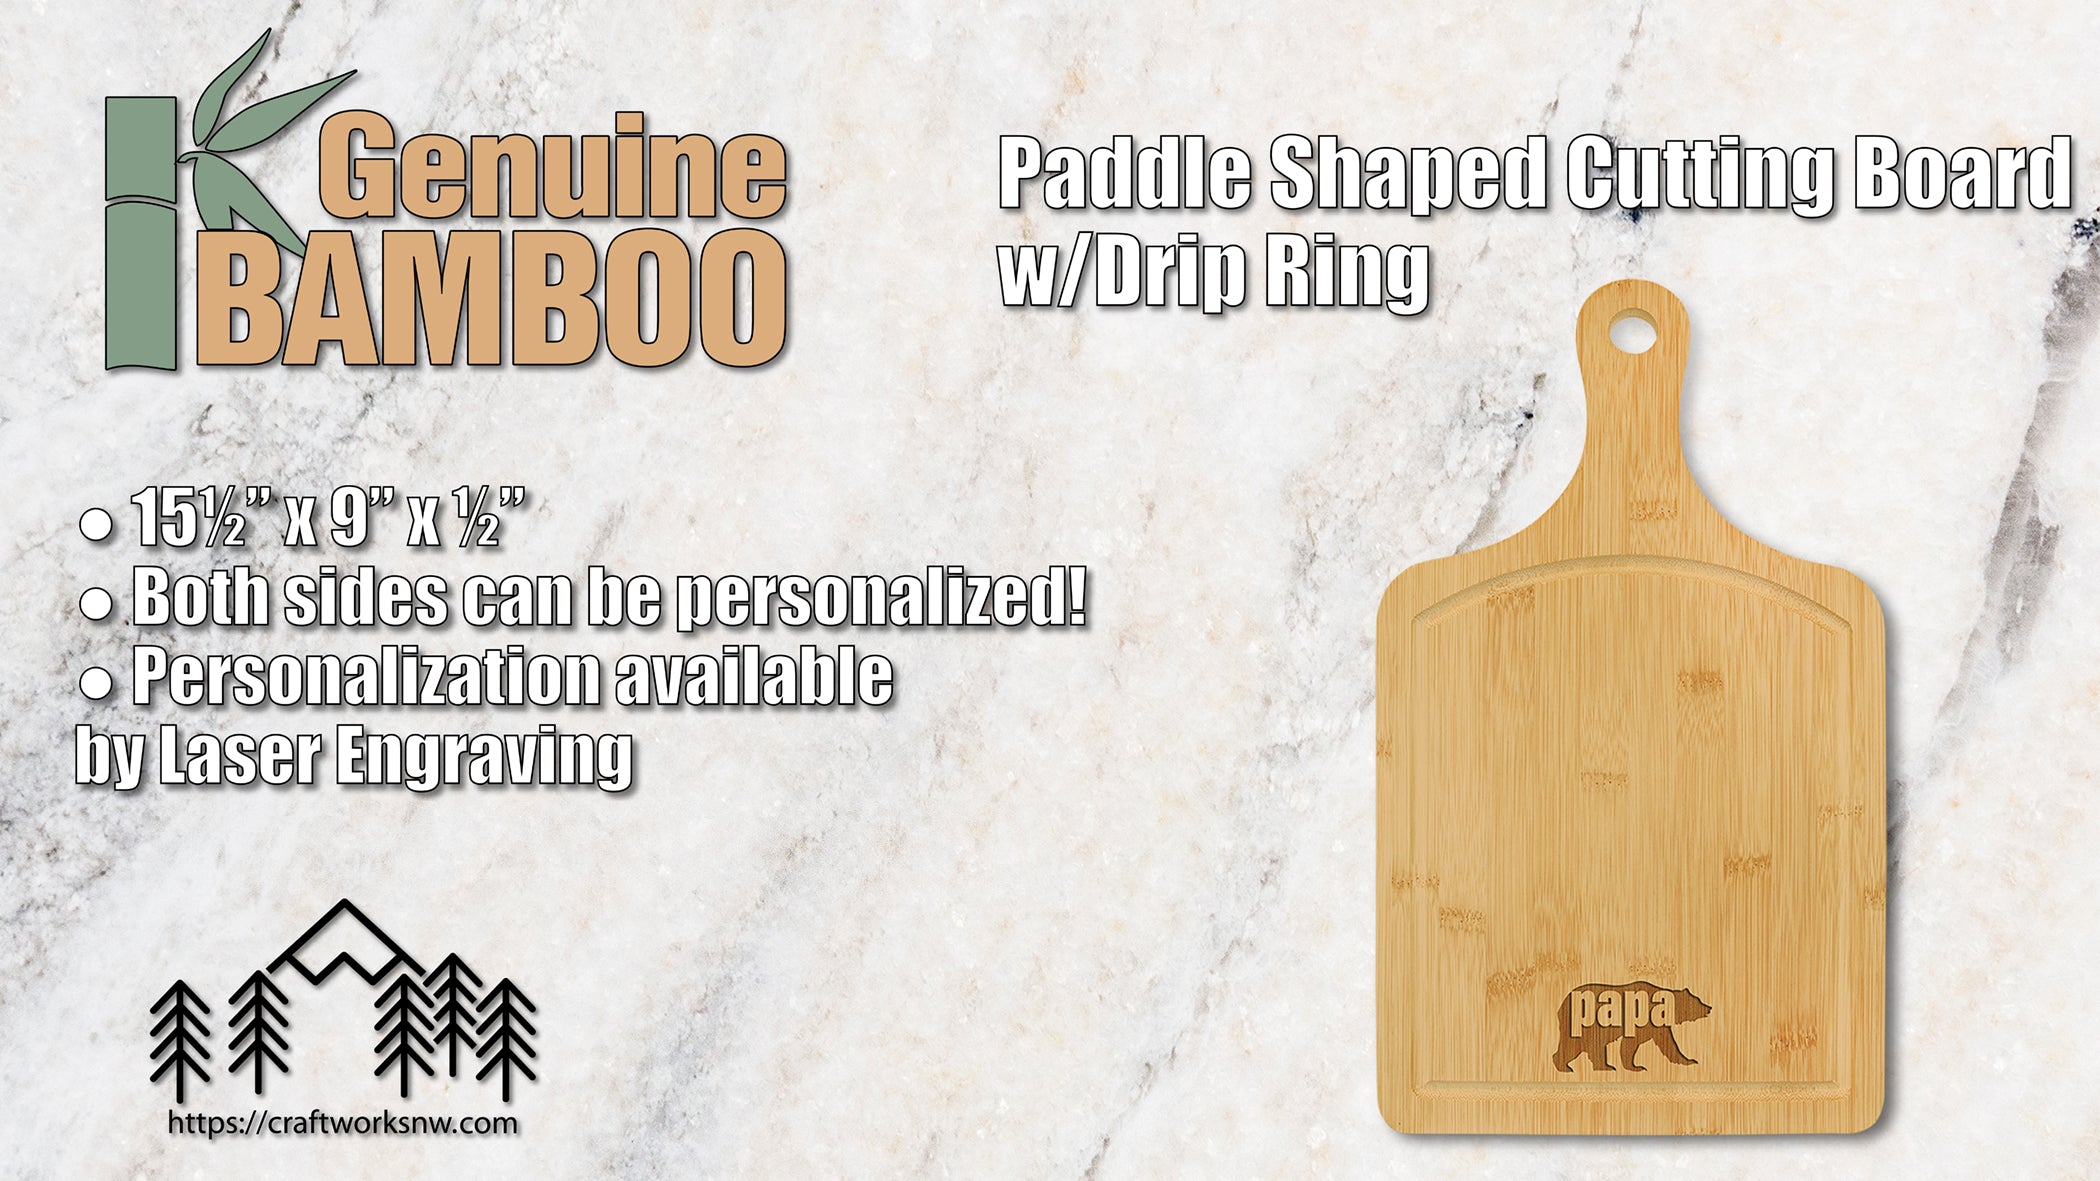 Paddle Shaped Bamboo Cutting Board w/Drip Ring, 15-1/2" x 9", Laser Engraved - Craftworks NW, LLC